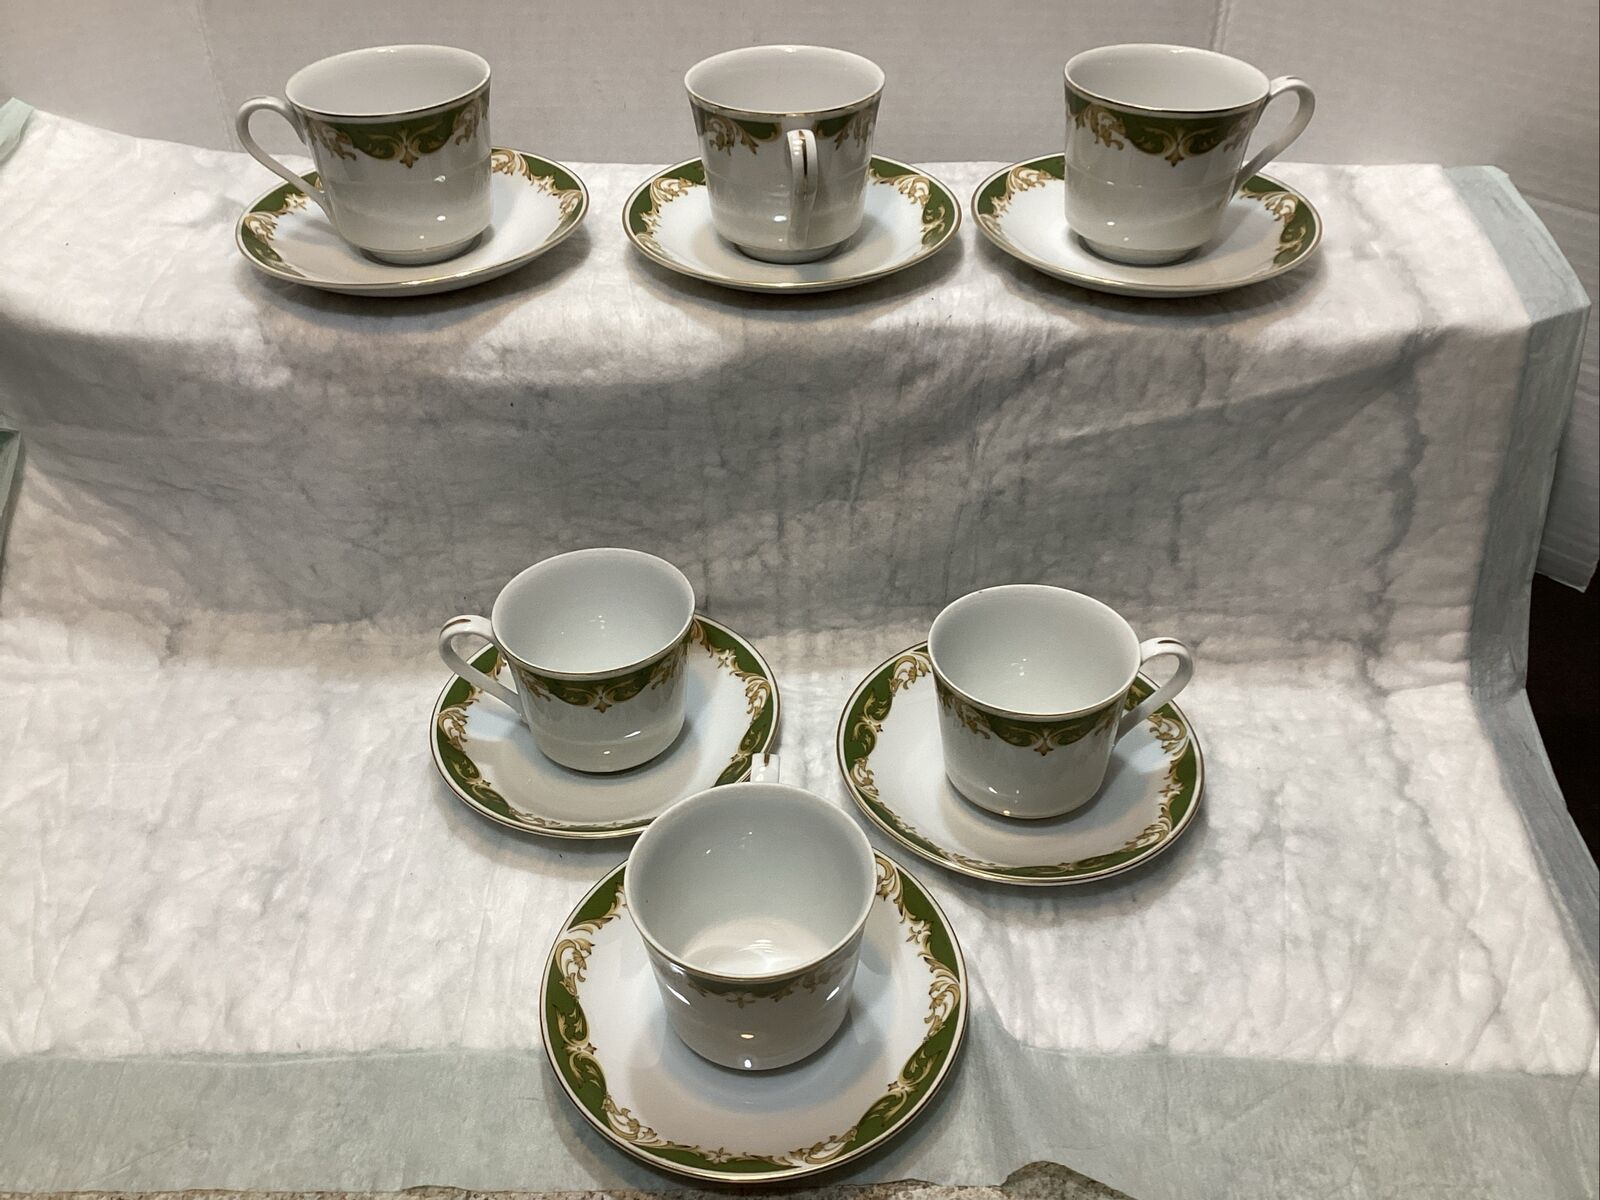 Vintage “ Style House” Kimberly Footed Cup & Saucer Sets 6 Sets